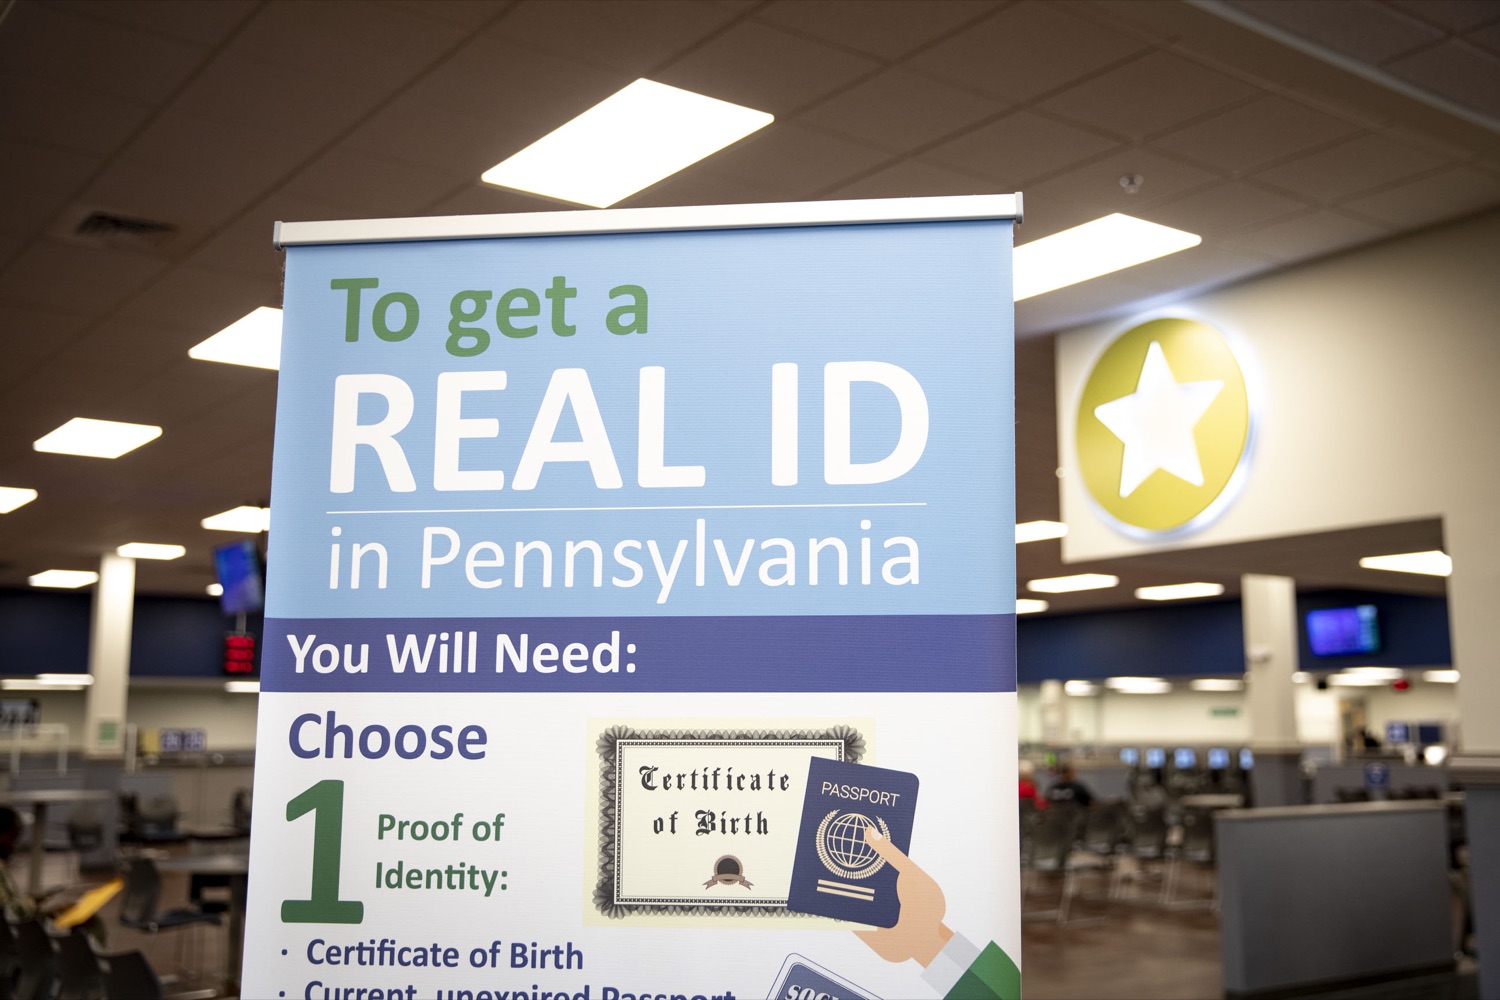 PennDOT reminds customers of updates to identification products as part of ongoing security enhancements, in Enola, PA on September 22, 2022.<br><a href="https://filesource.amperwave.net/commonwealthofpa/photo/22223_dot_security_cz_11.jpg" target="_blank">⇣ Download Photo</a>